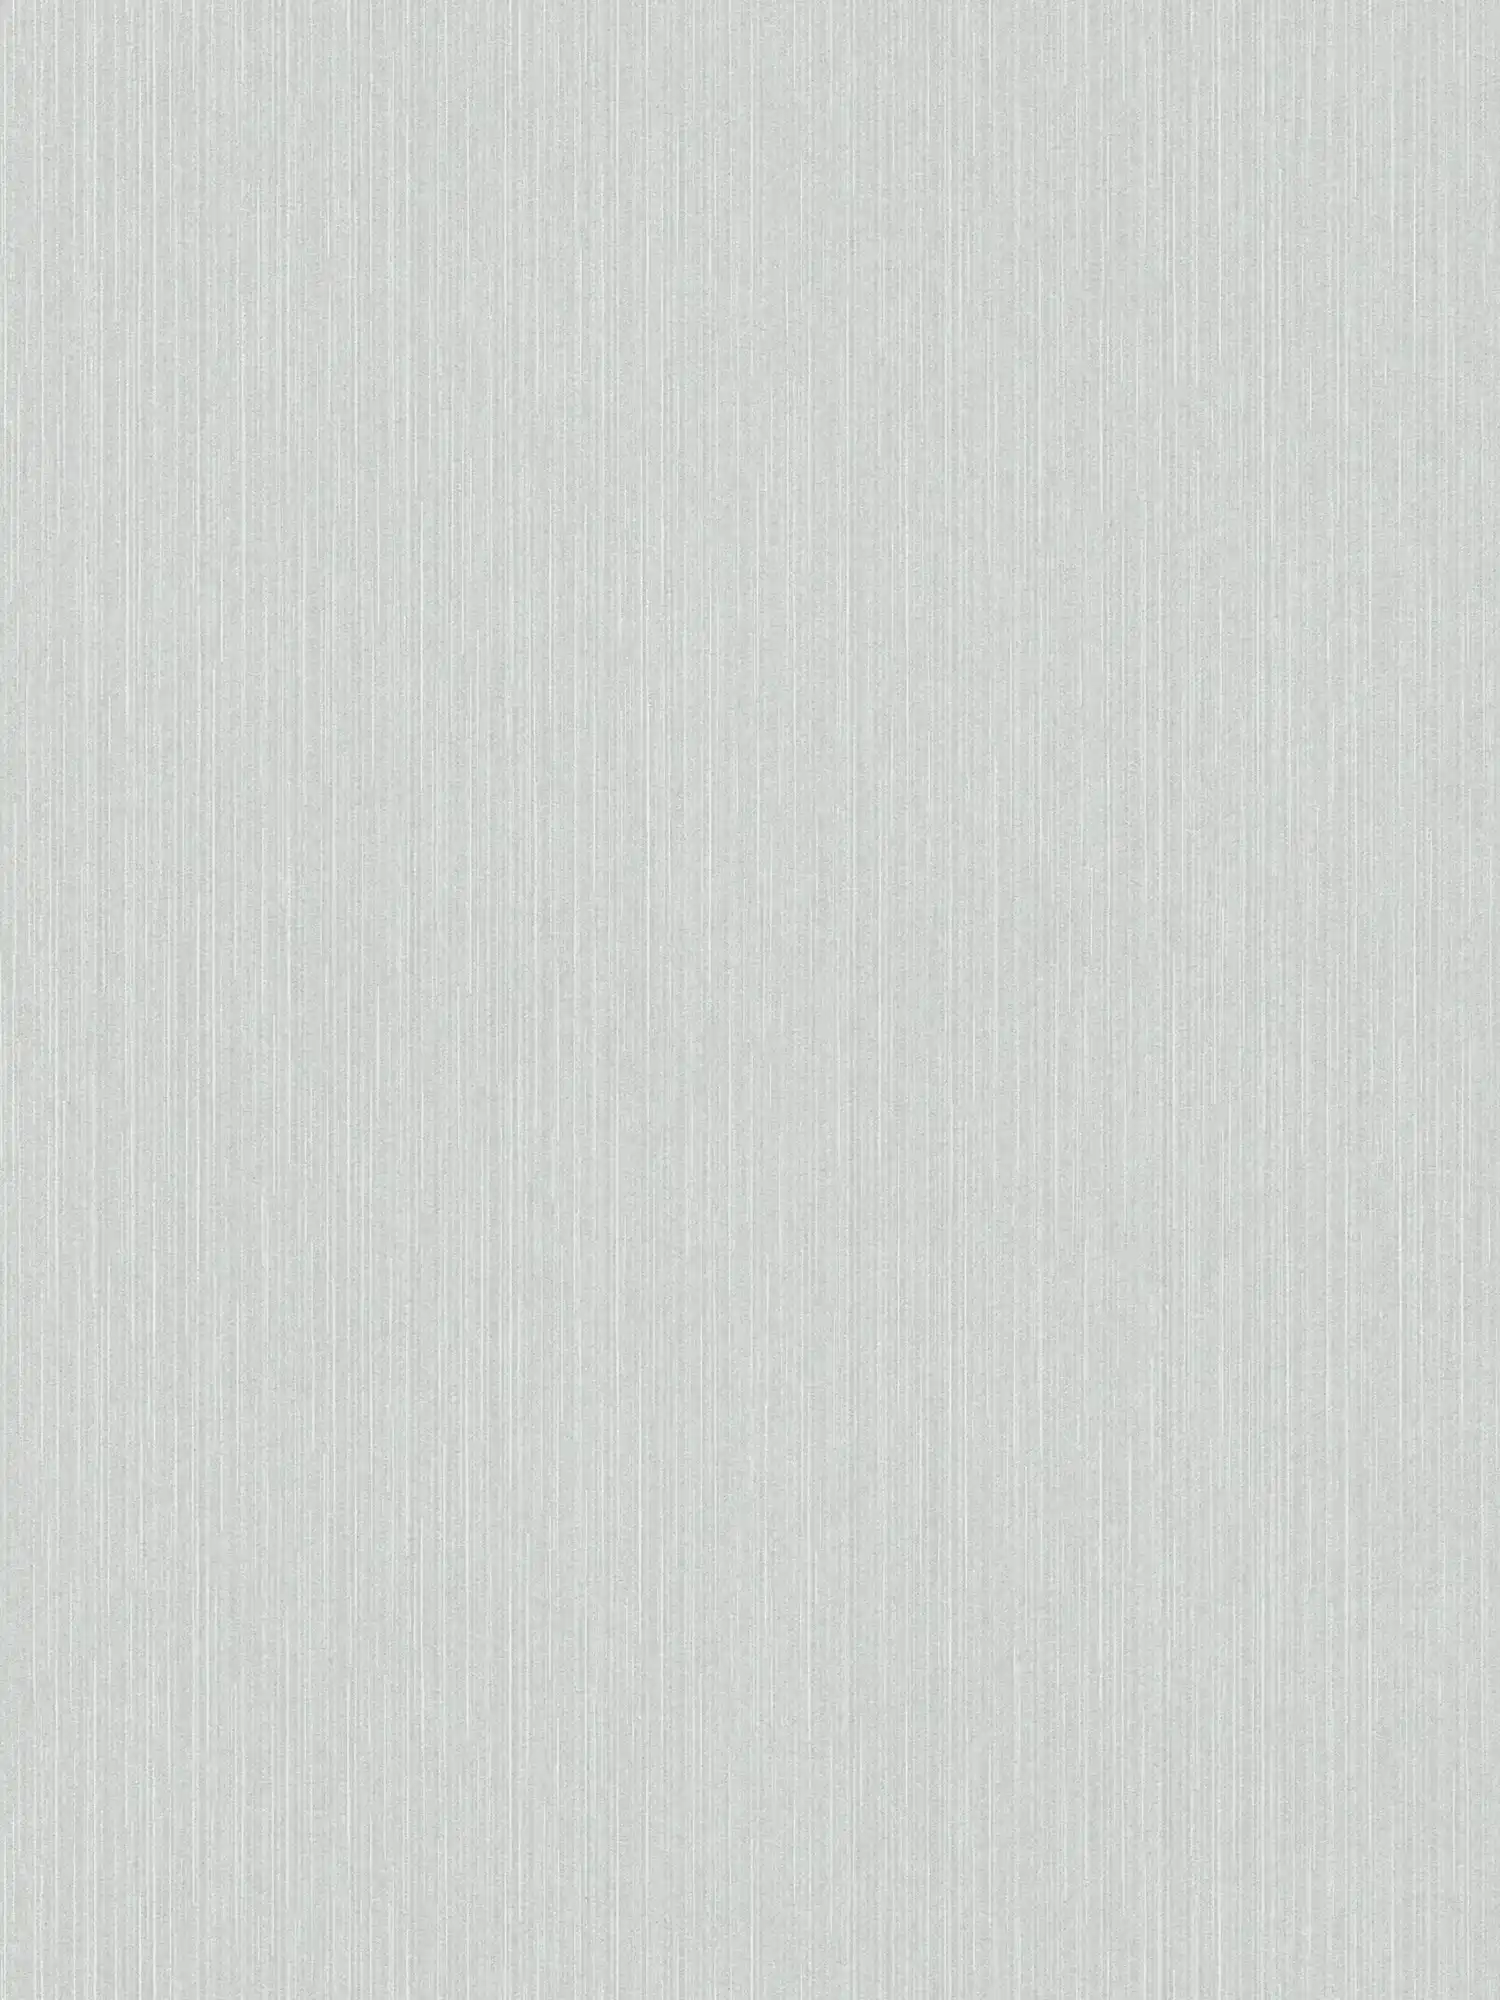 Lined wallpaper silver grey with glossy effect - grey
